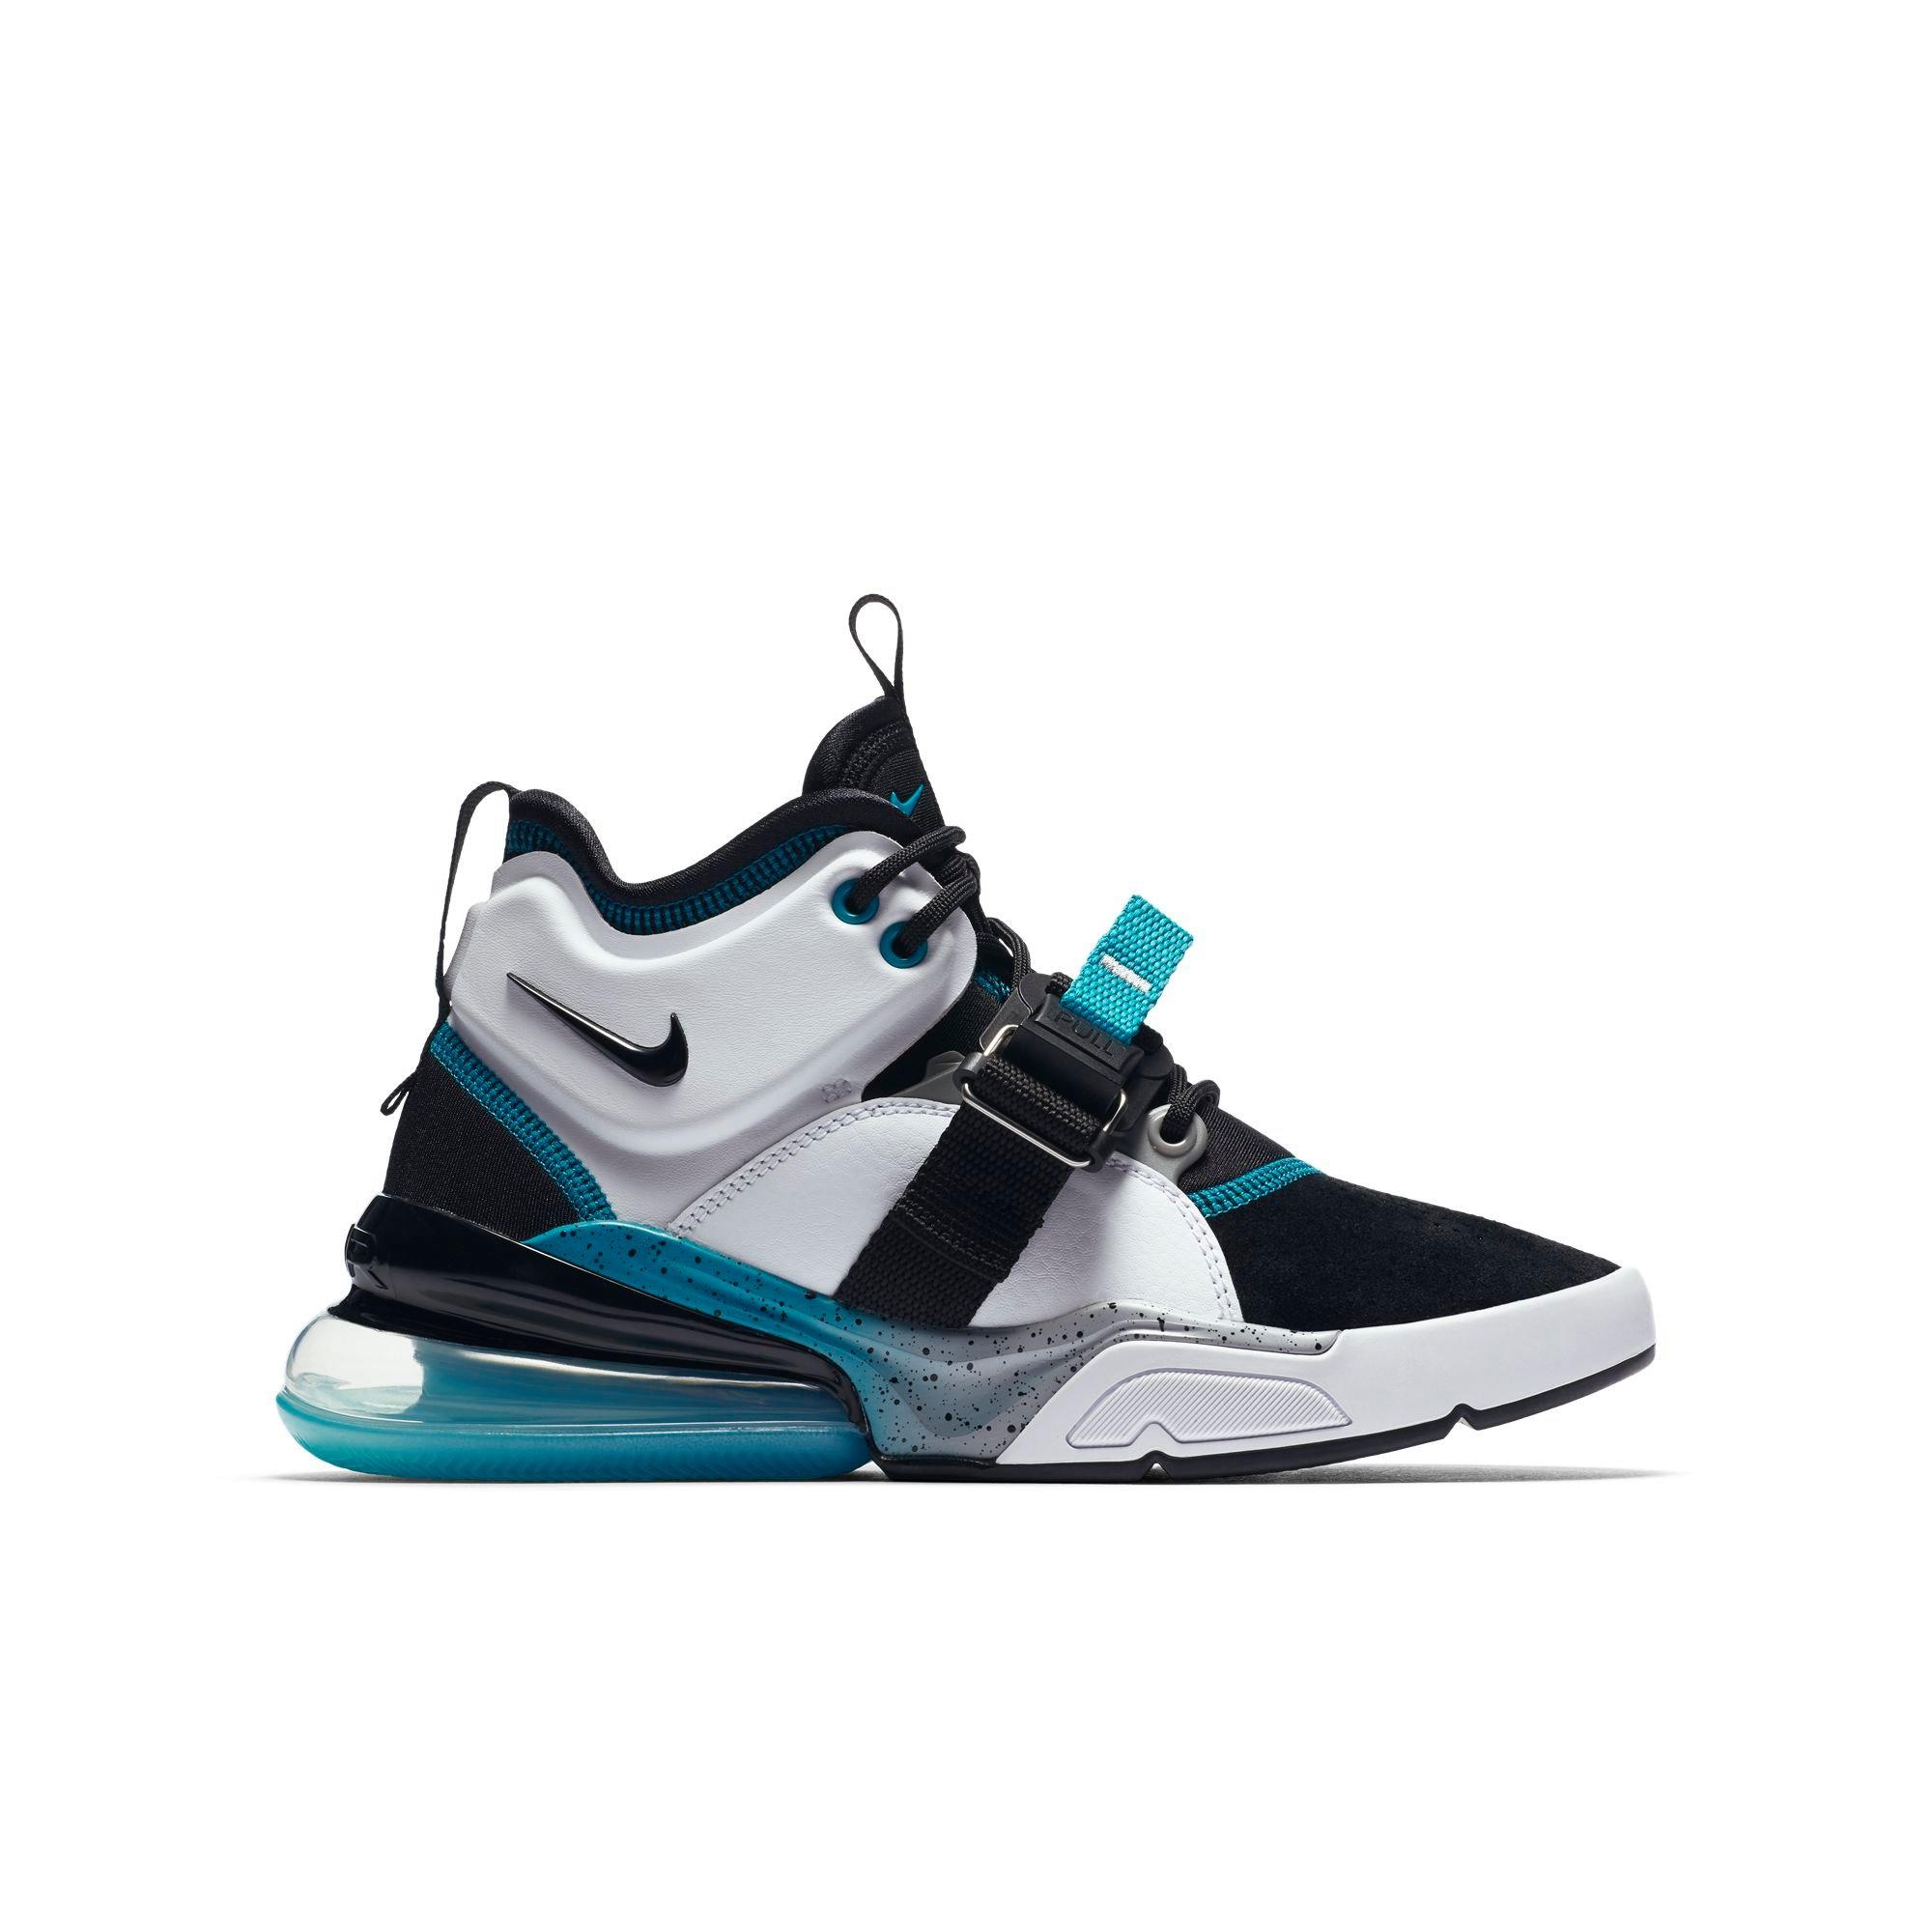 air force 270 low black and white